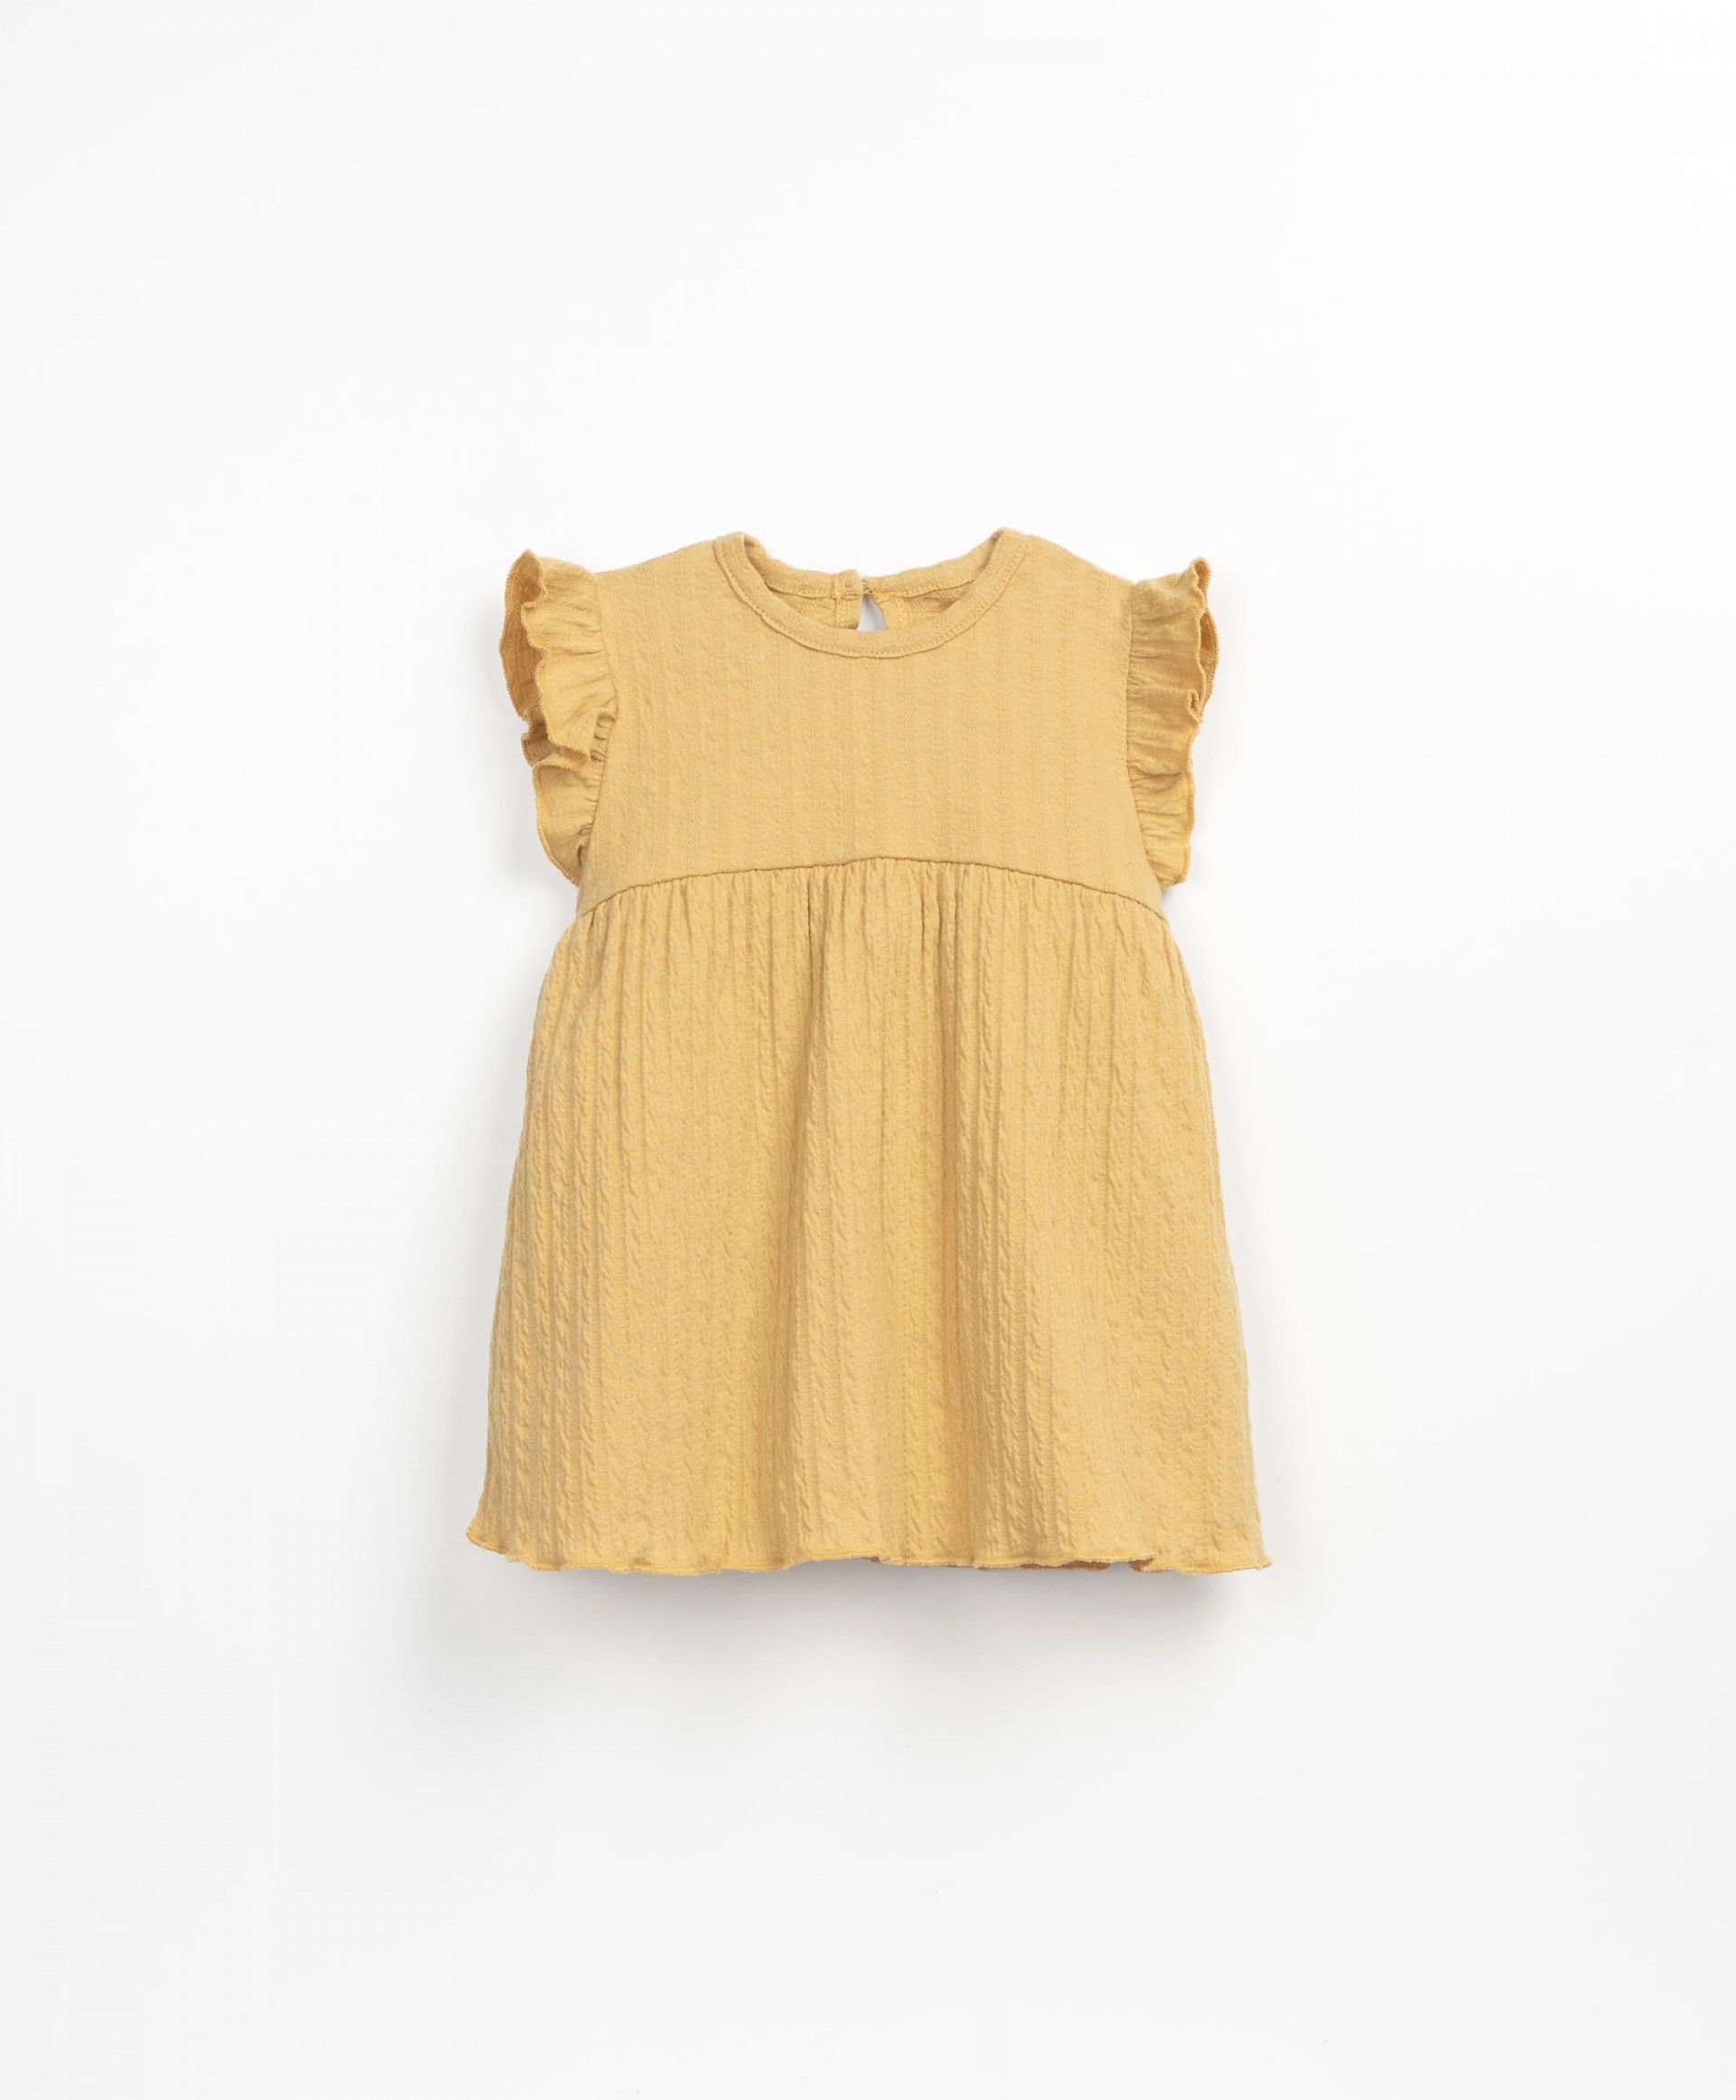 Dress with frill on the shoulders | Textile Art